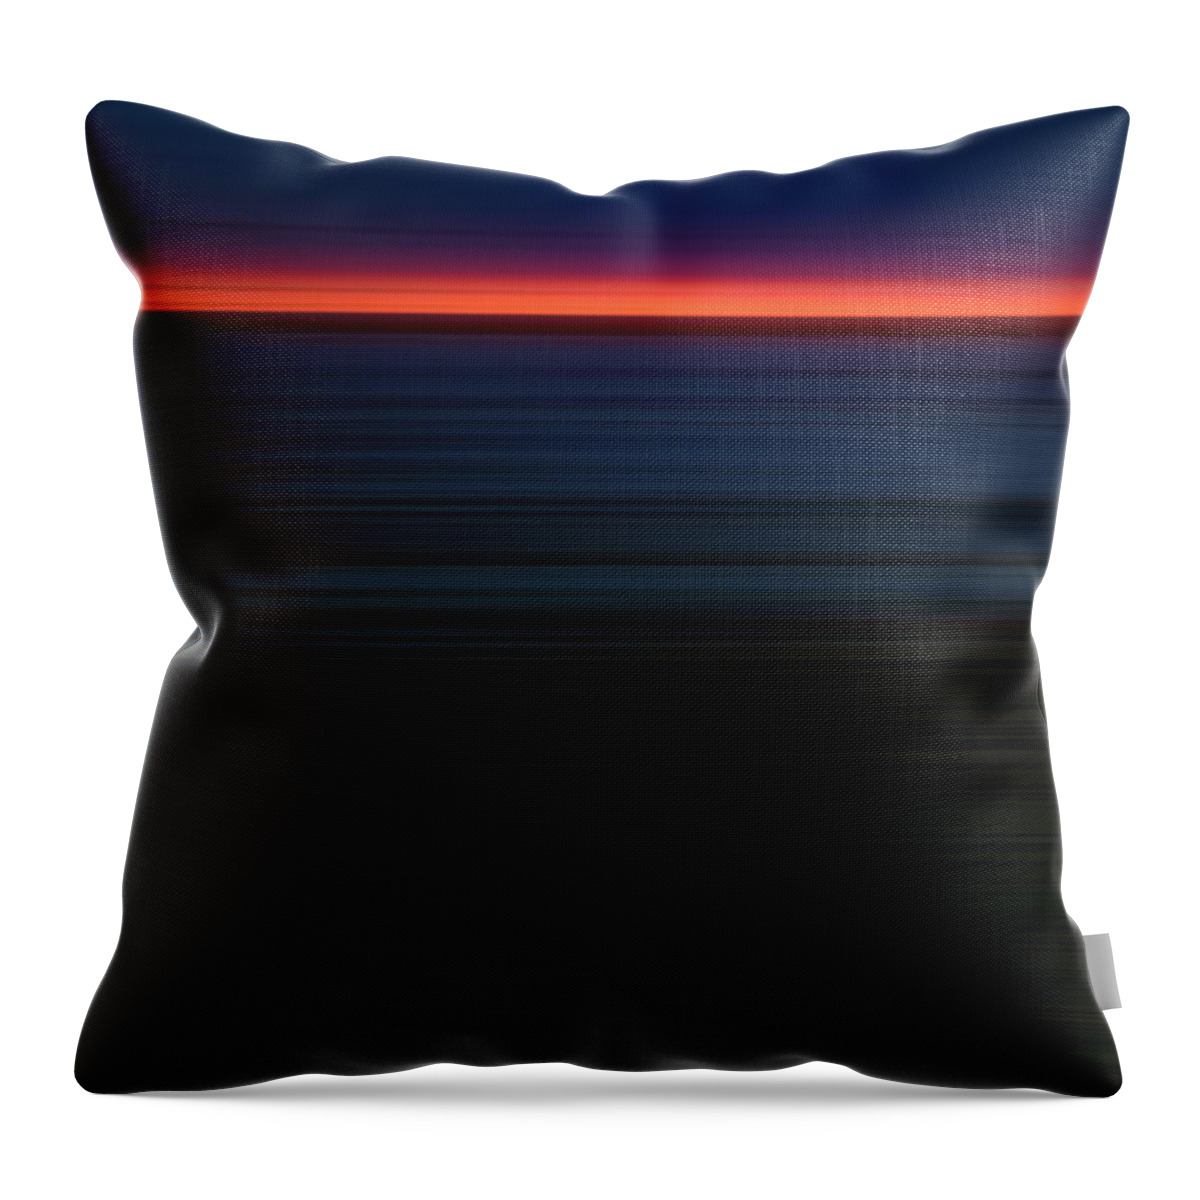 Sunrise Throw Pillow featuring the photograph Sunrise 1 by Scott Norris